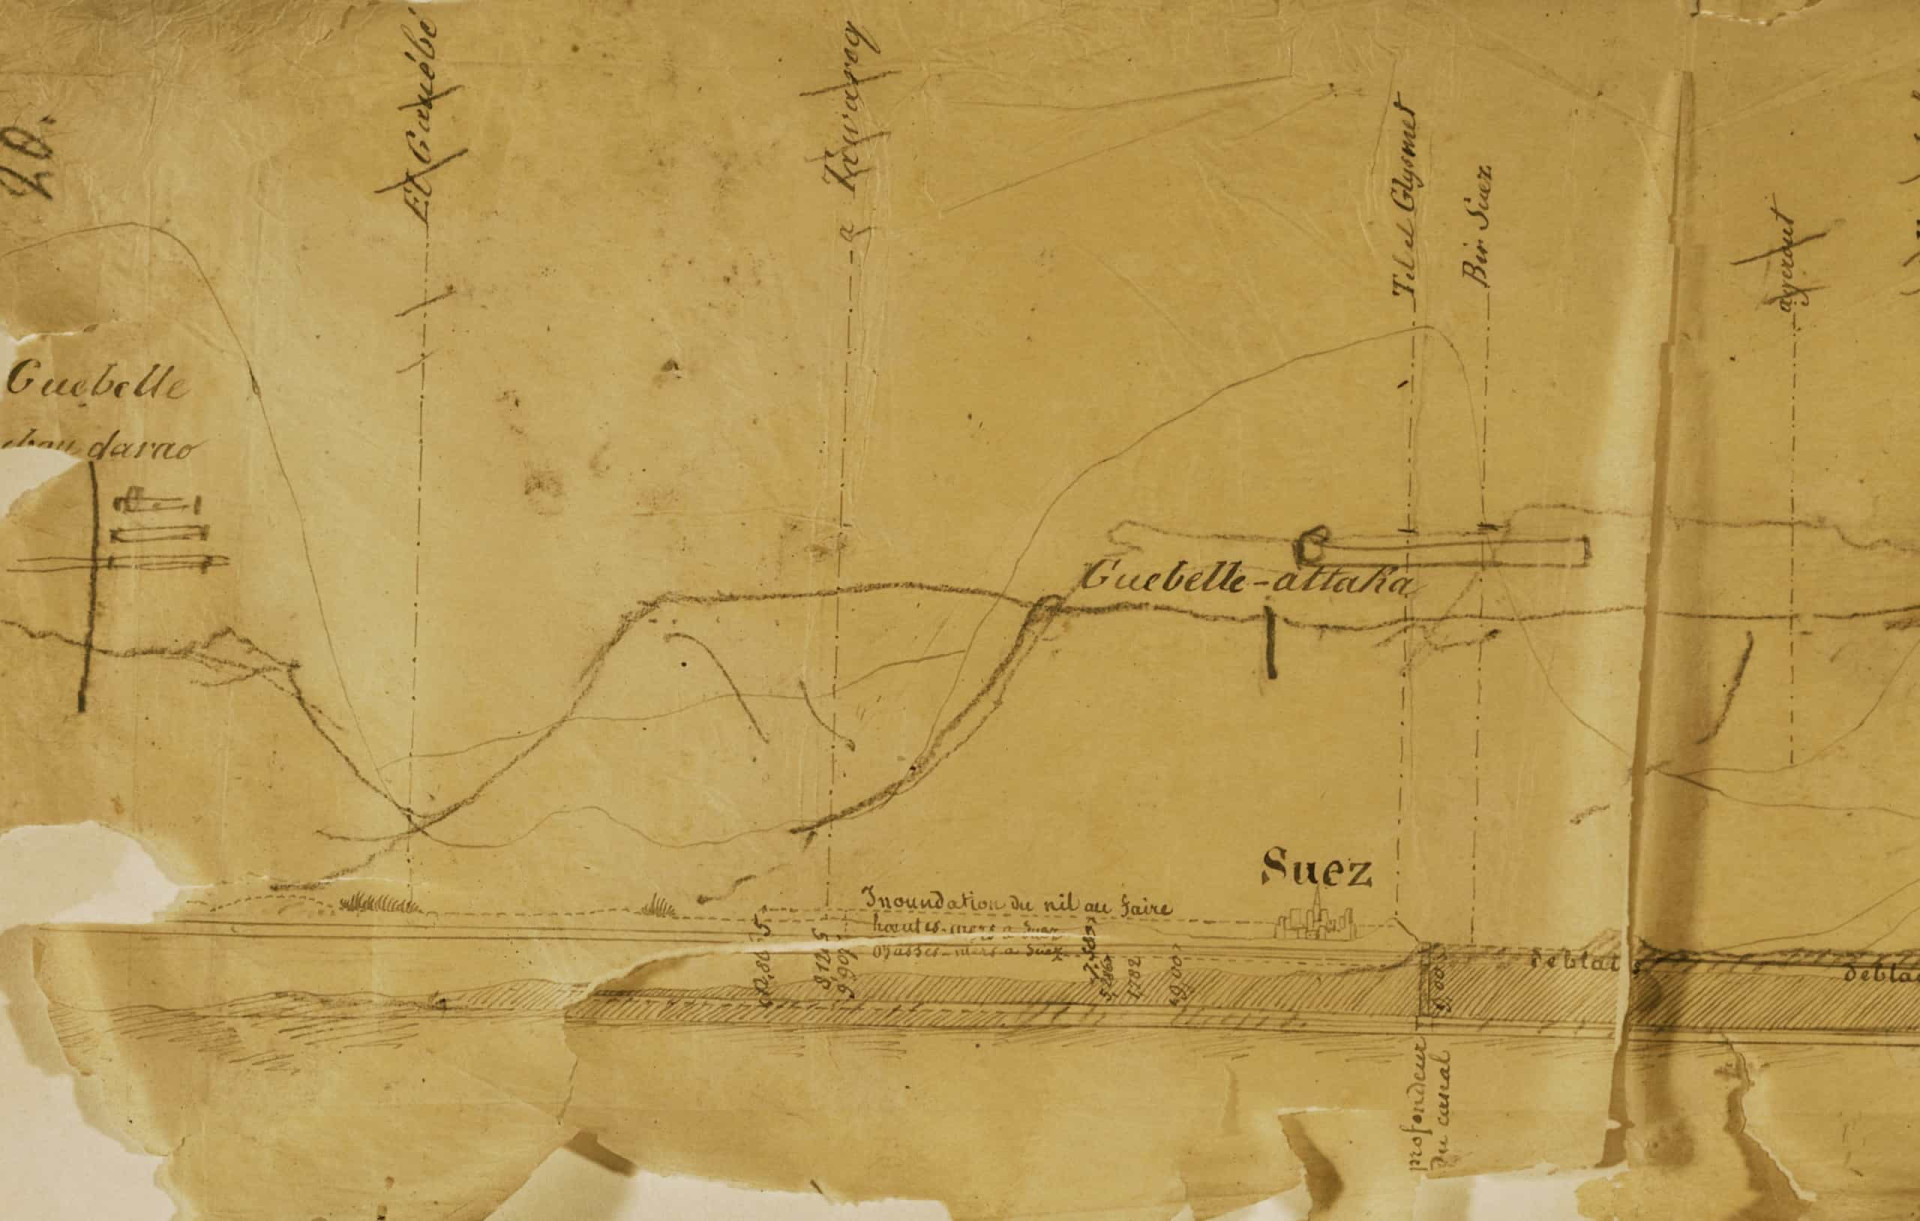 <p>Linant de Bellefonds' pilot study was examined in detail by Austrian railroad pioneer Alois Negrelli (1799–1858). Negrelli's engineering expertise proved invaluable and after he drew up calculations and blueprints (pictured), the project was given the green light. Unfortunately, Negrelli would die of suspected food poisoning just weeks before the establishment of the Suez Canal Company, and just half a year before the works on the canal project were to officially begin.</p>